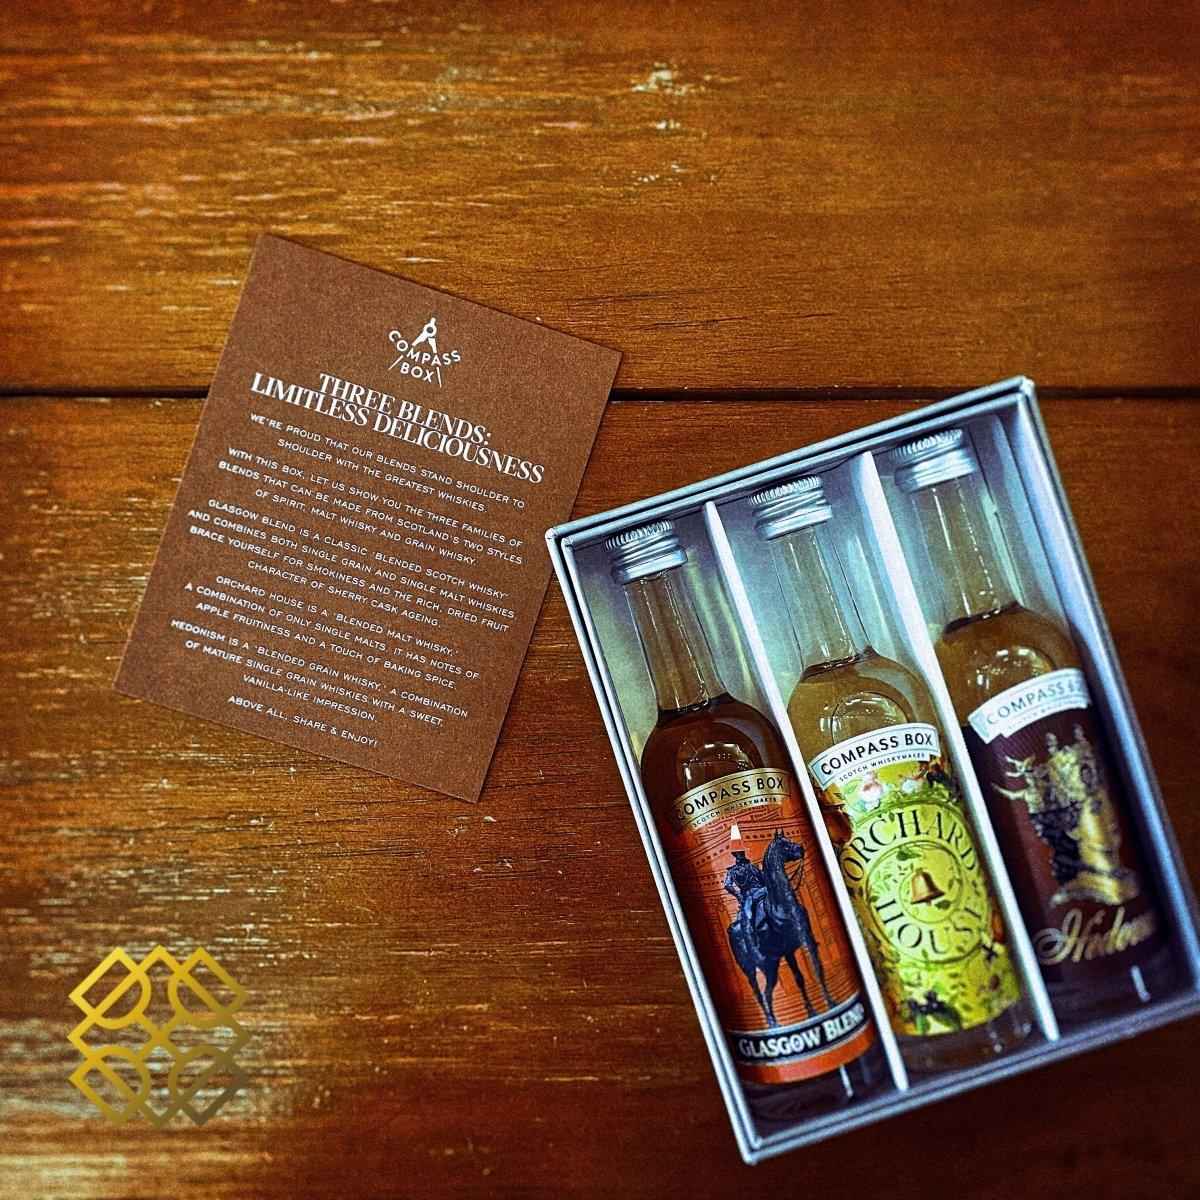 Compass box - The blenders' collection (3 x 50ml) - Whisky, 2